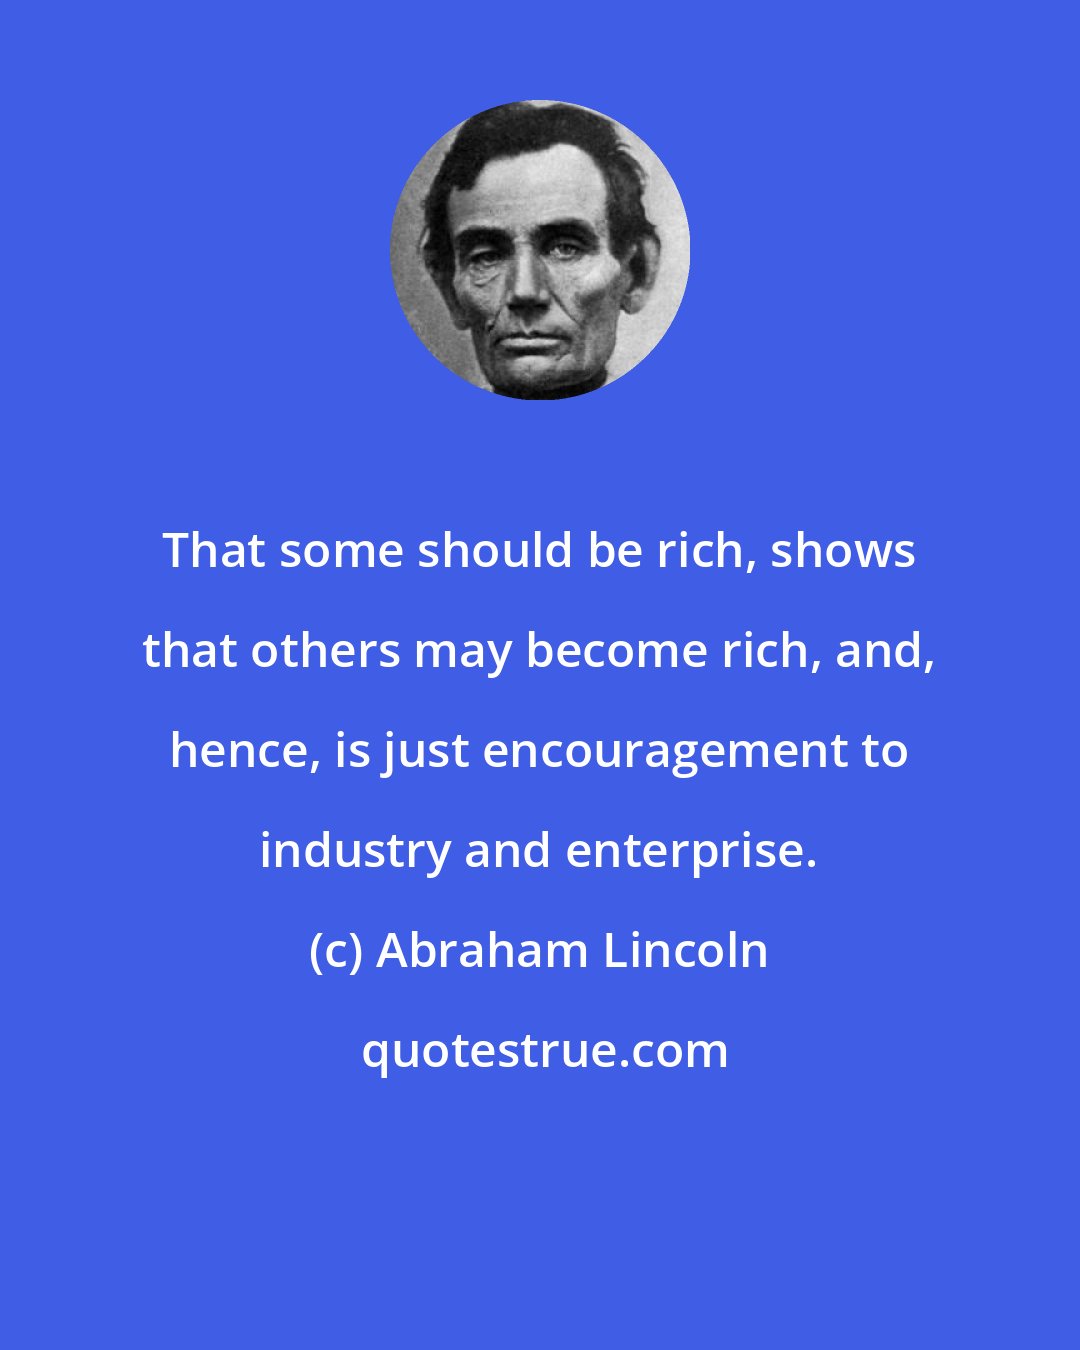 Abraham Lincoln: That some should be rich, shows that others may become rich, and, hence, is just encouragement to industry and enterprise.